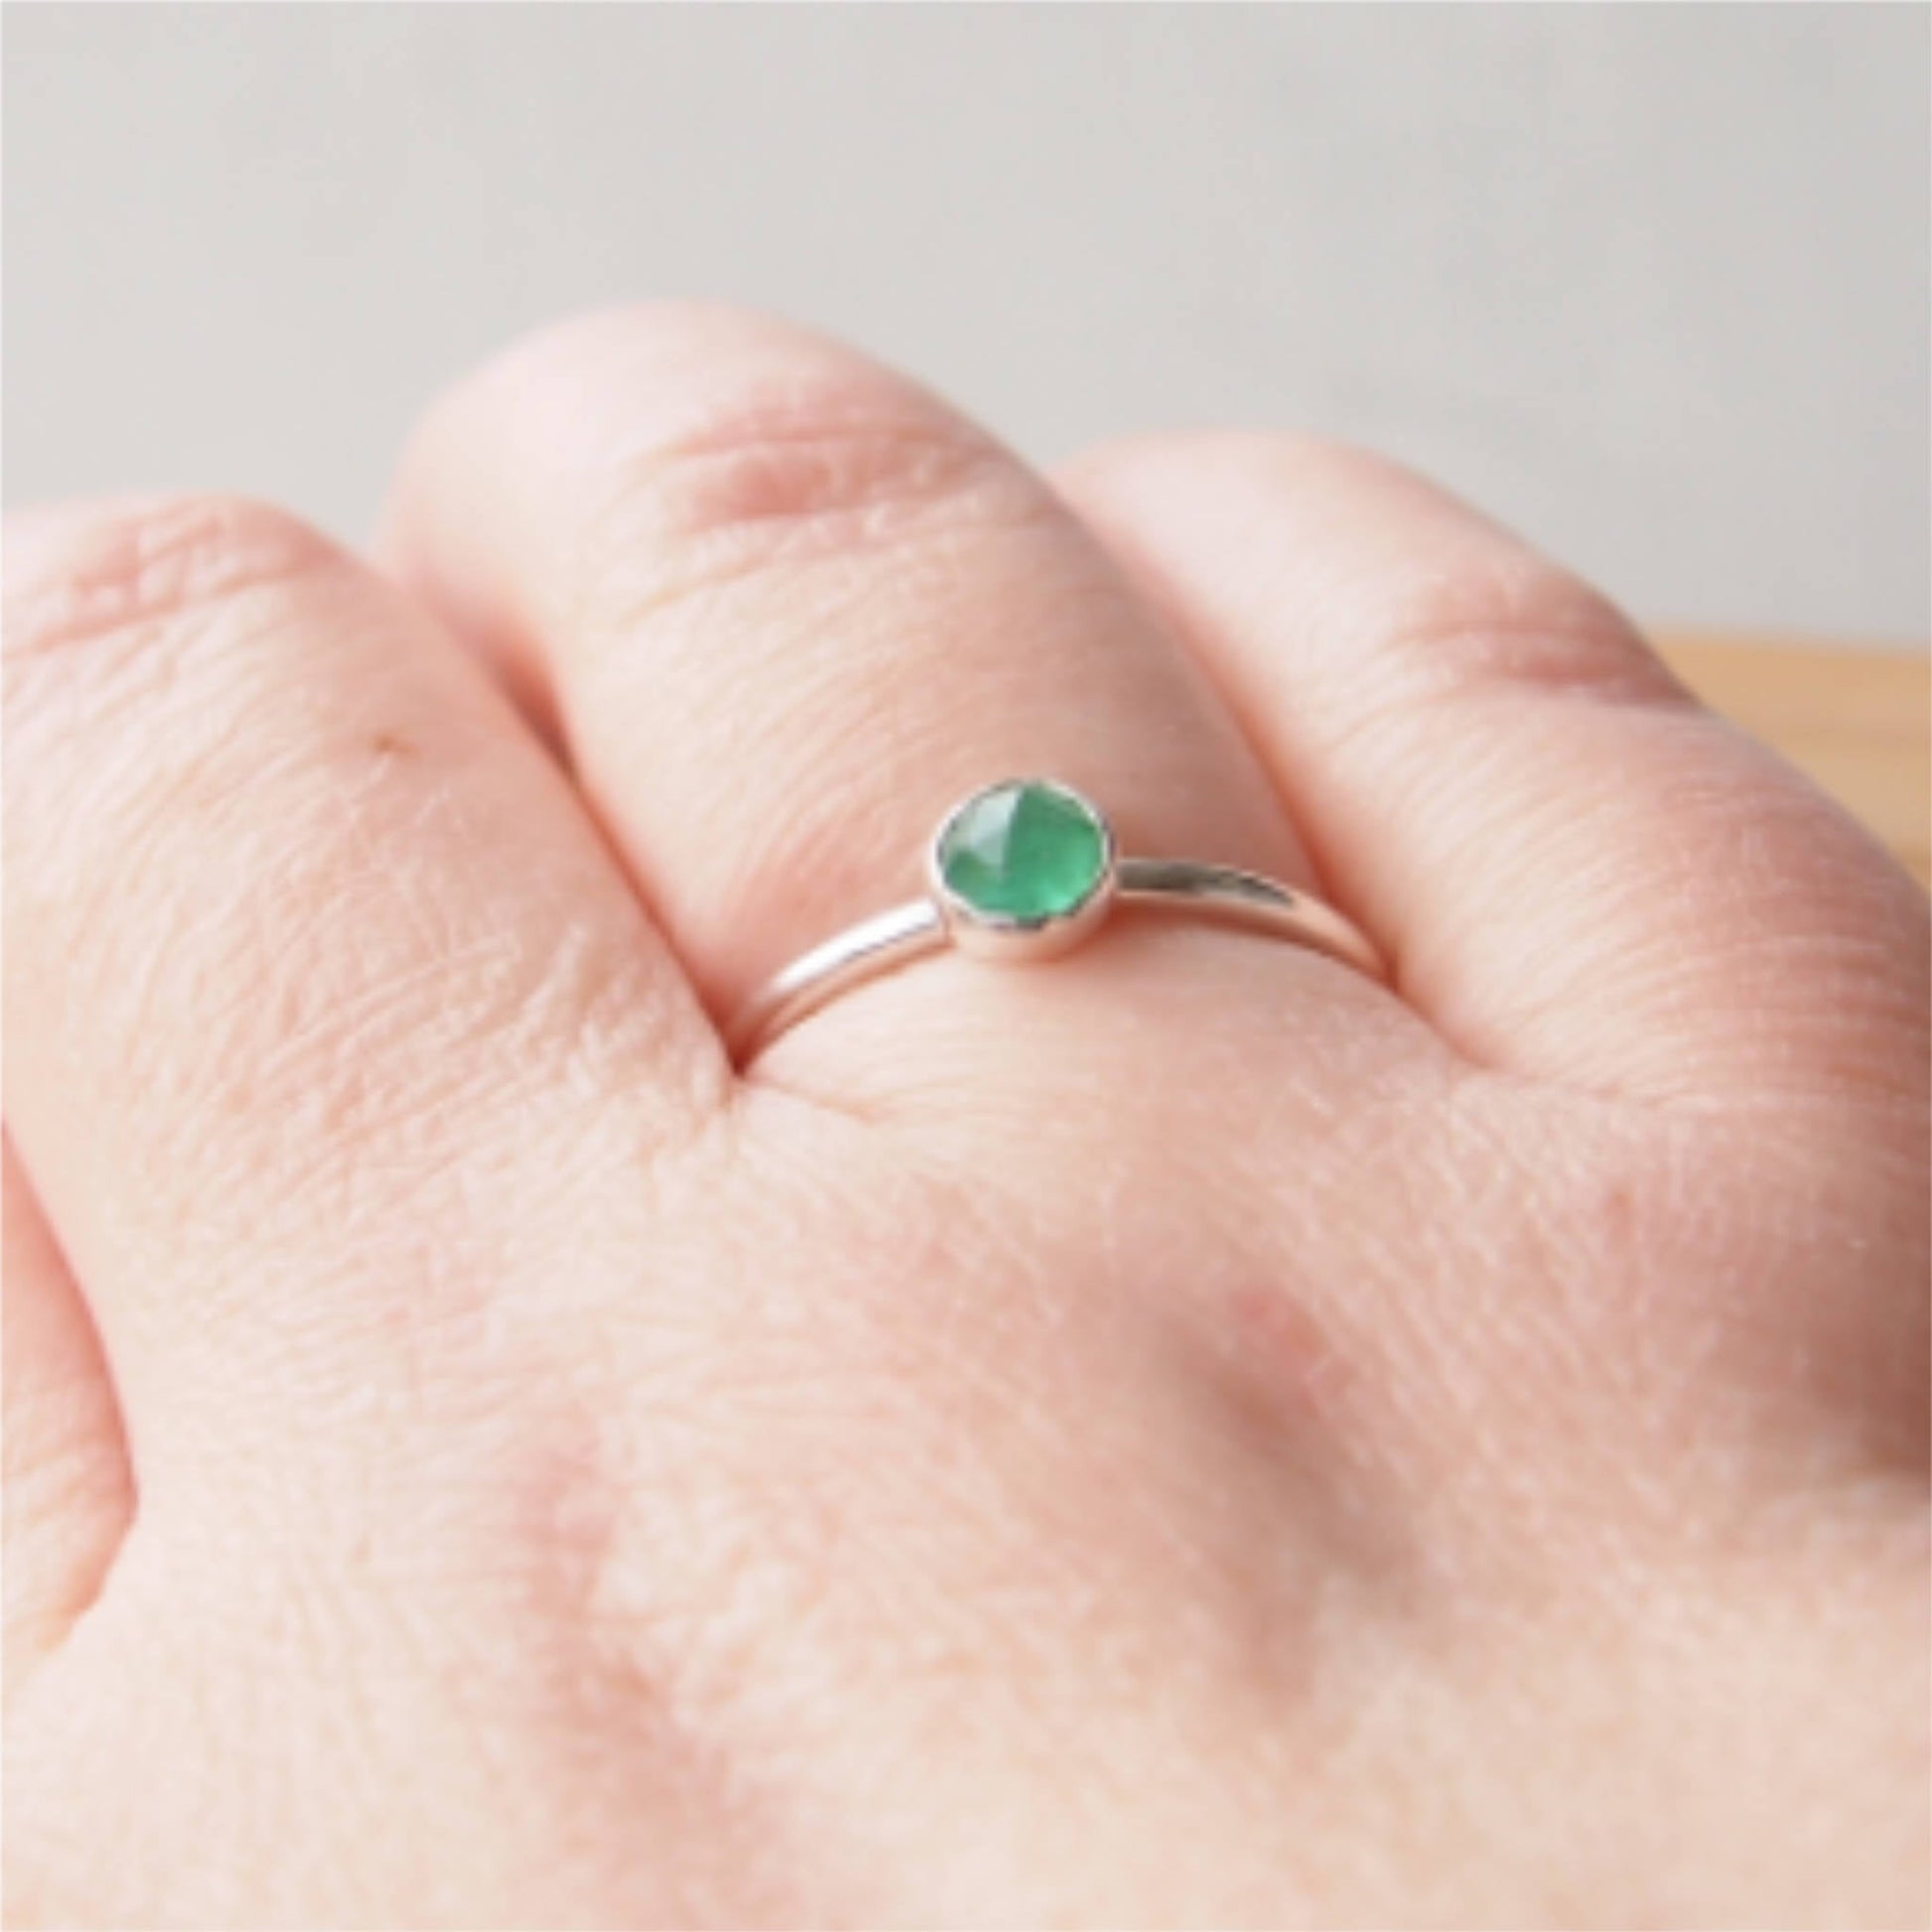 Simple Silver and Emerald ring with a round 5mm green emerald, May's Birthstone. Handmade by Maram Jewellery in Scotland